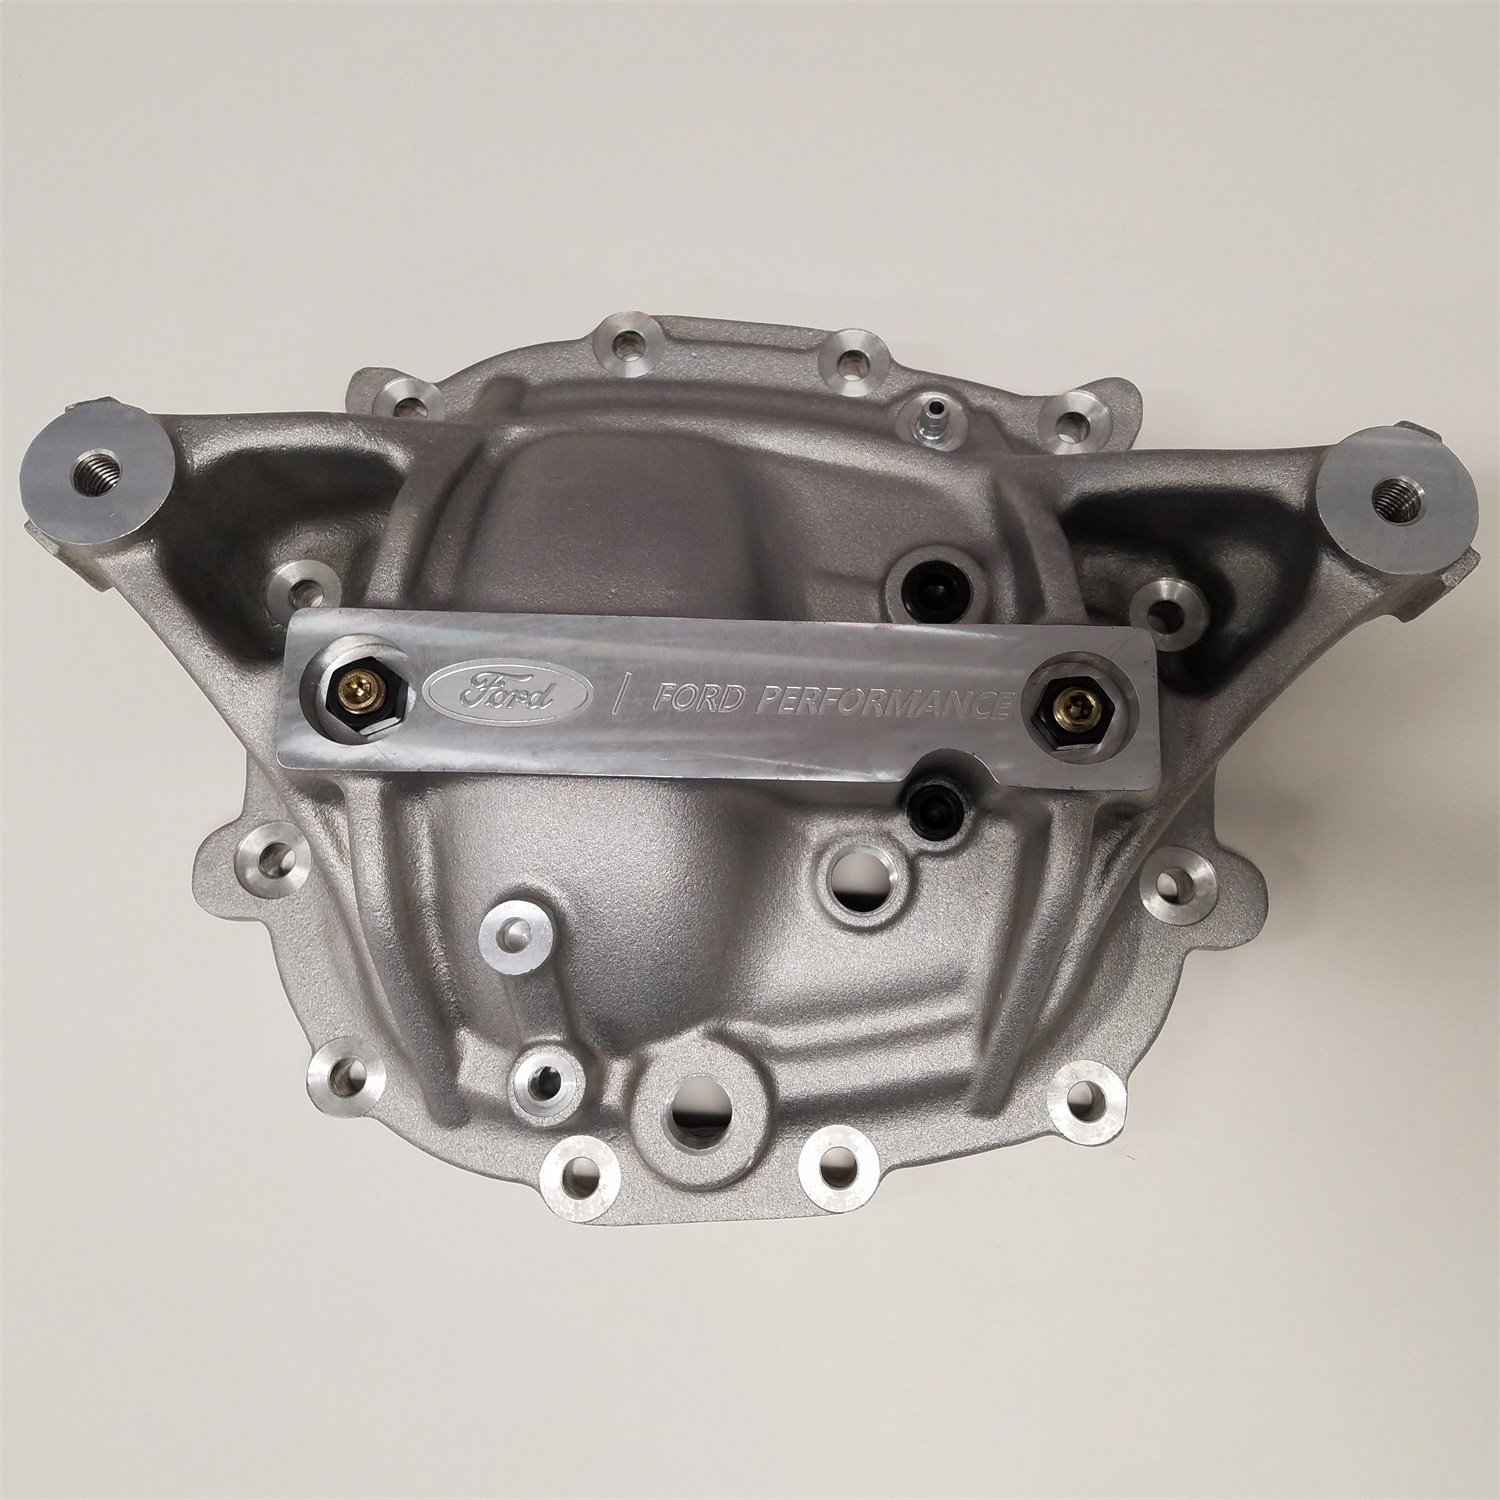 IRS 8.8 in Axle Girdle Cover for Select Late-Model Ford Mustangs